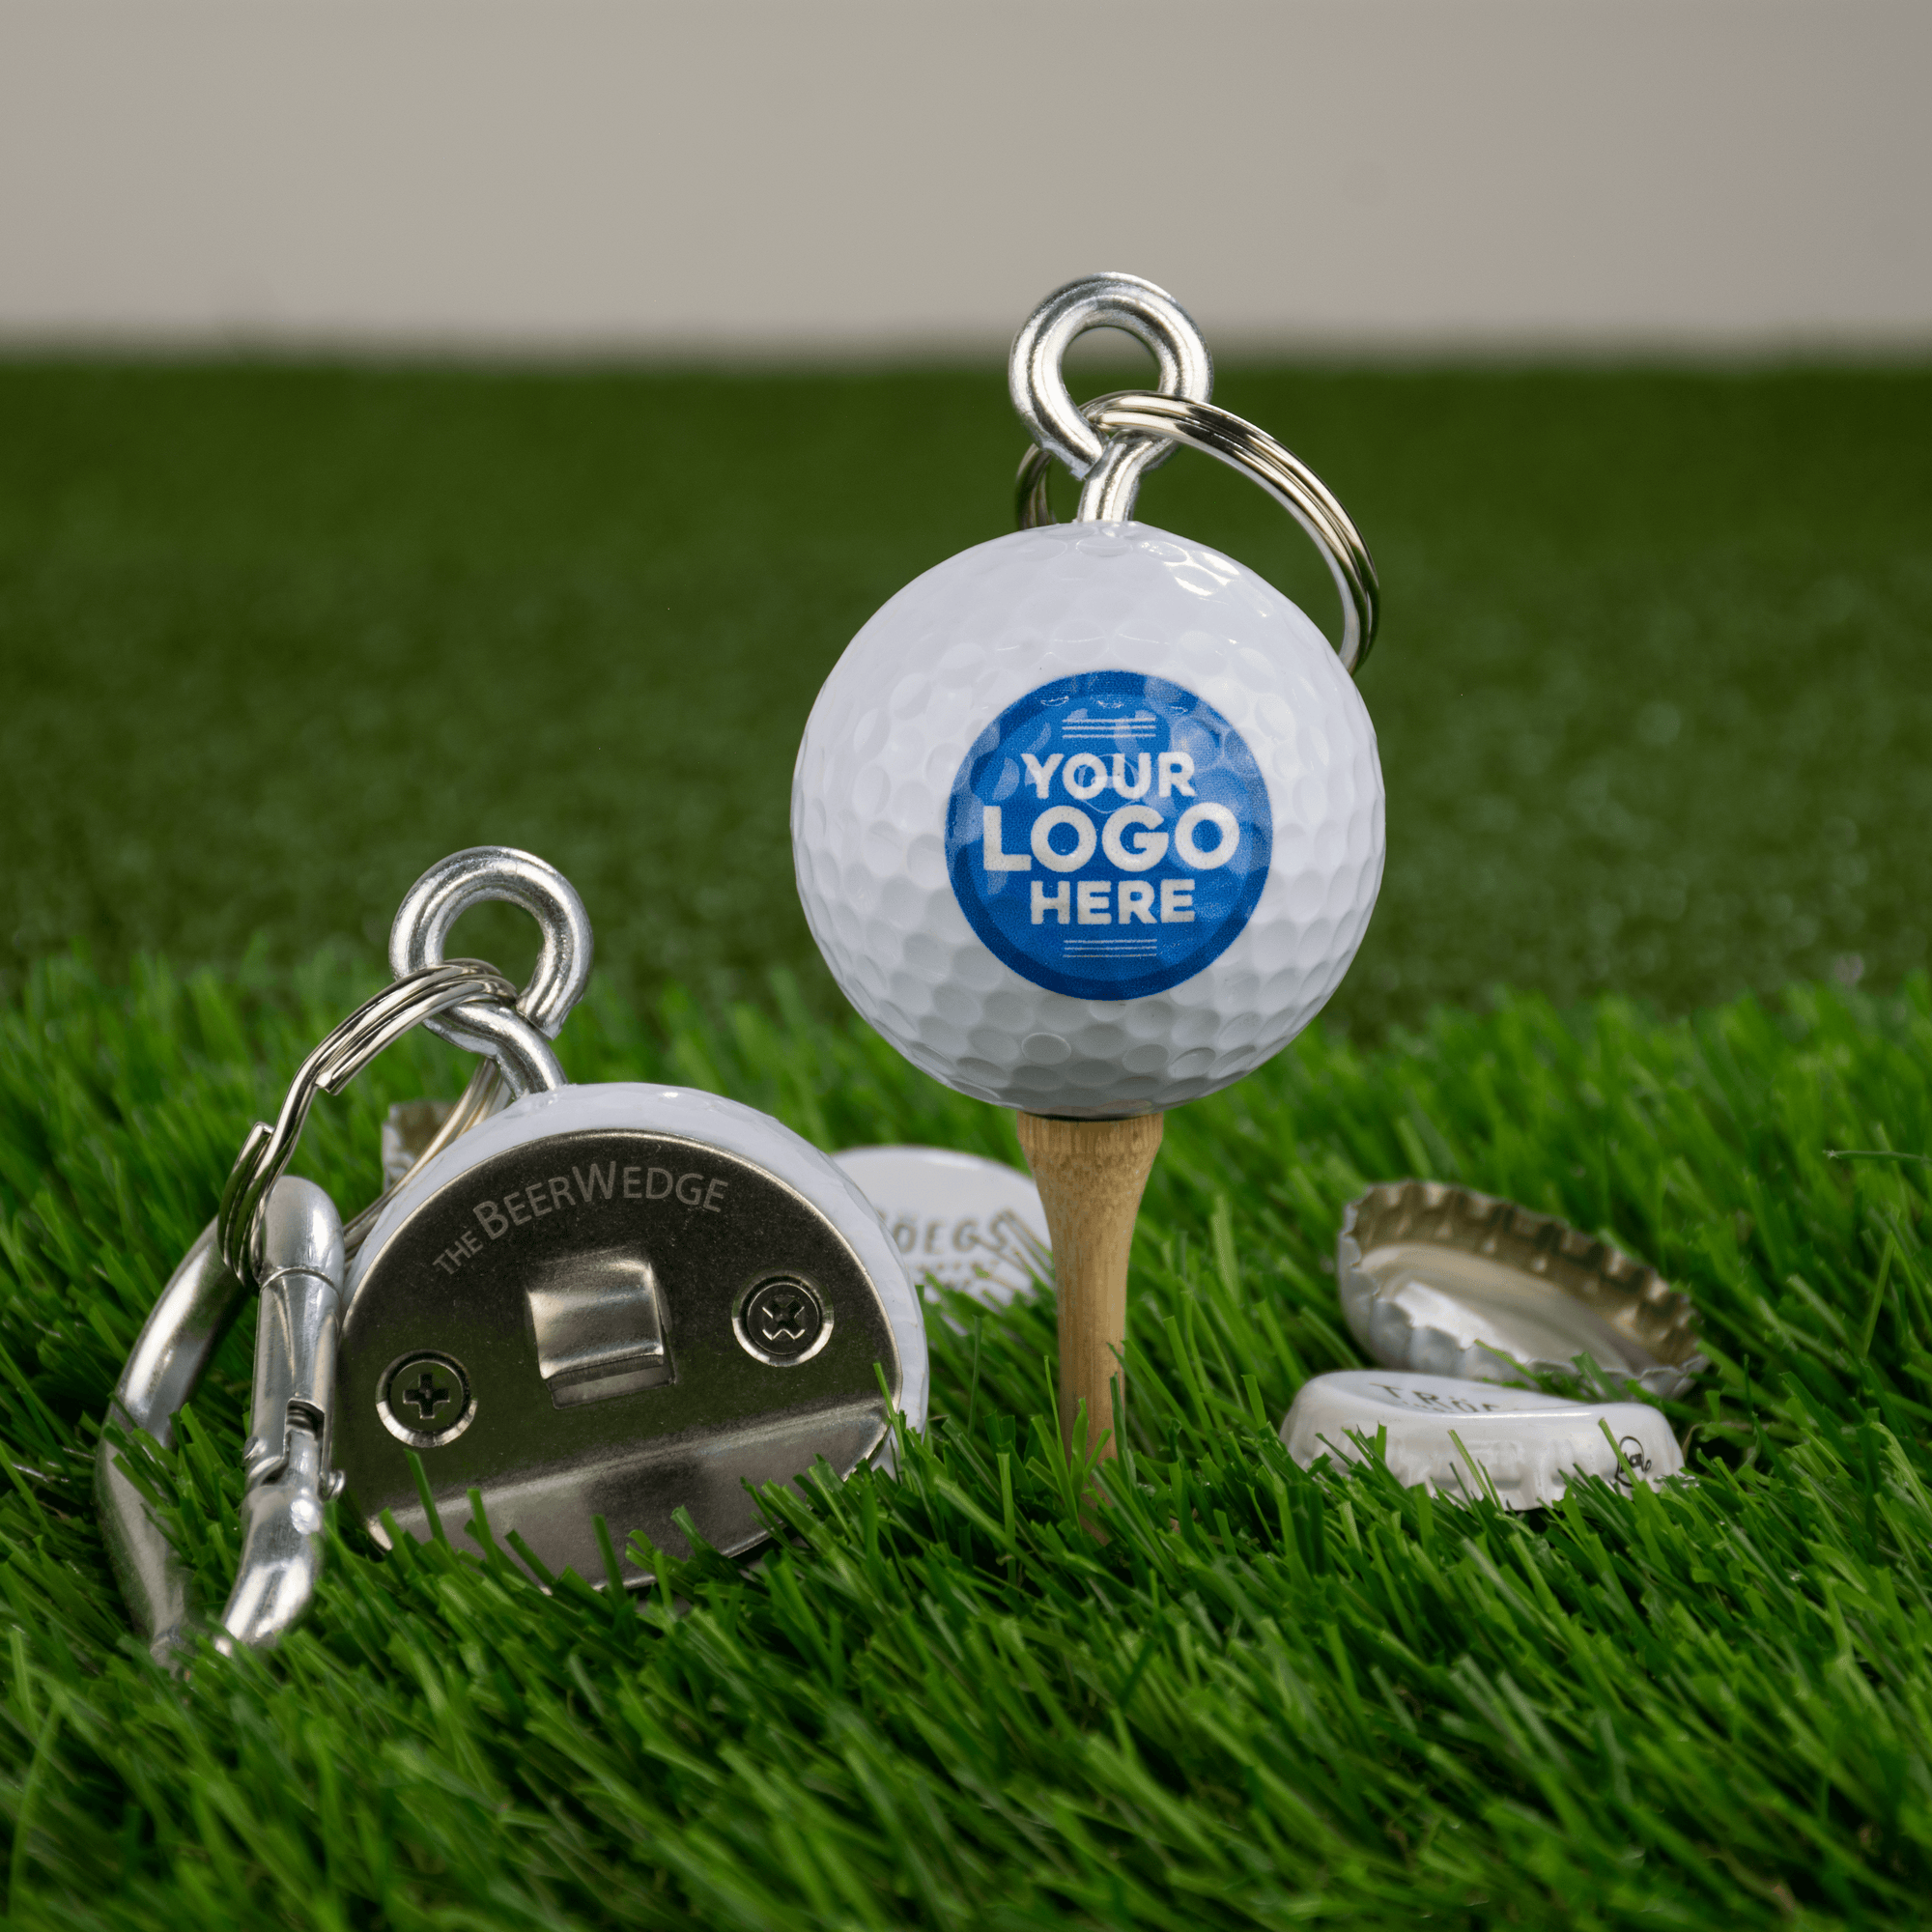 65 Best Golf Gifts in 2023 - Great Gifts for Men Who Love Golf